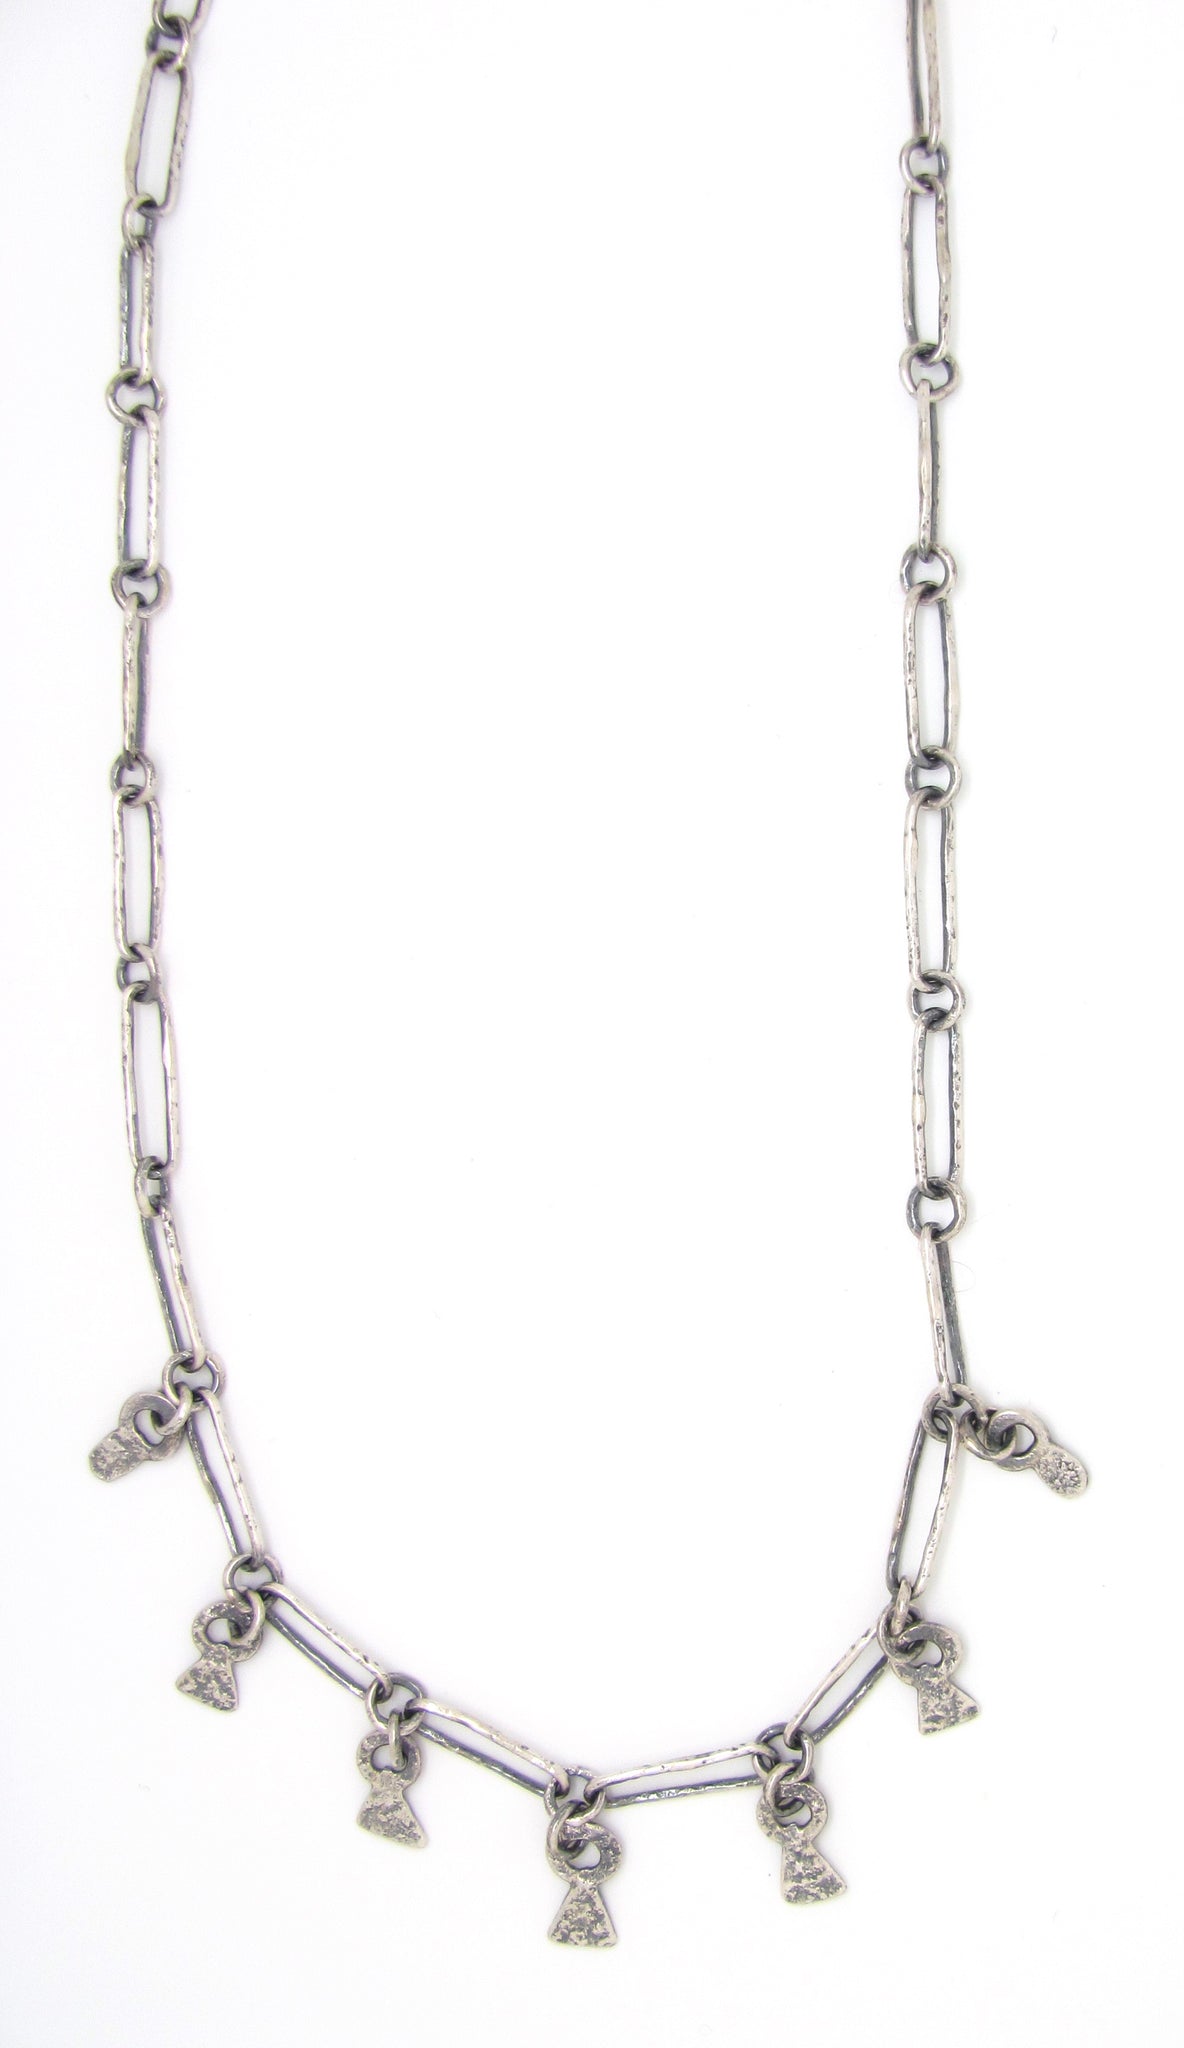 Small Chimney Rock Style Chain